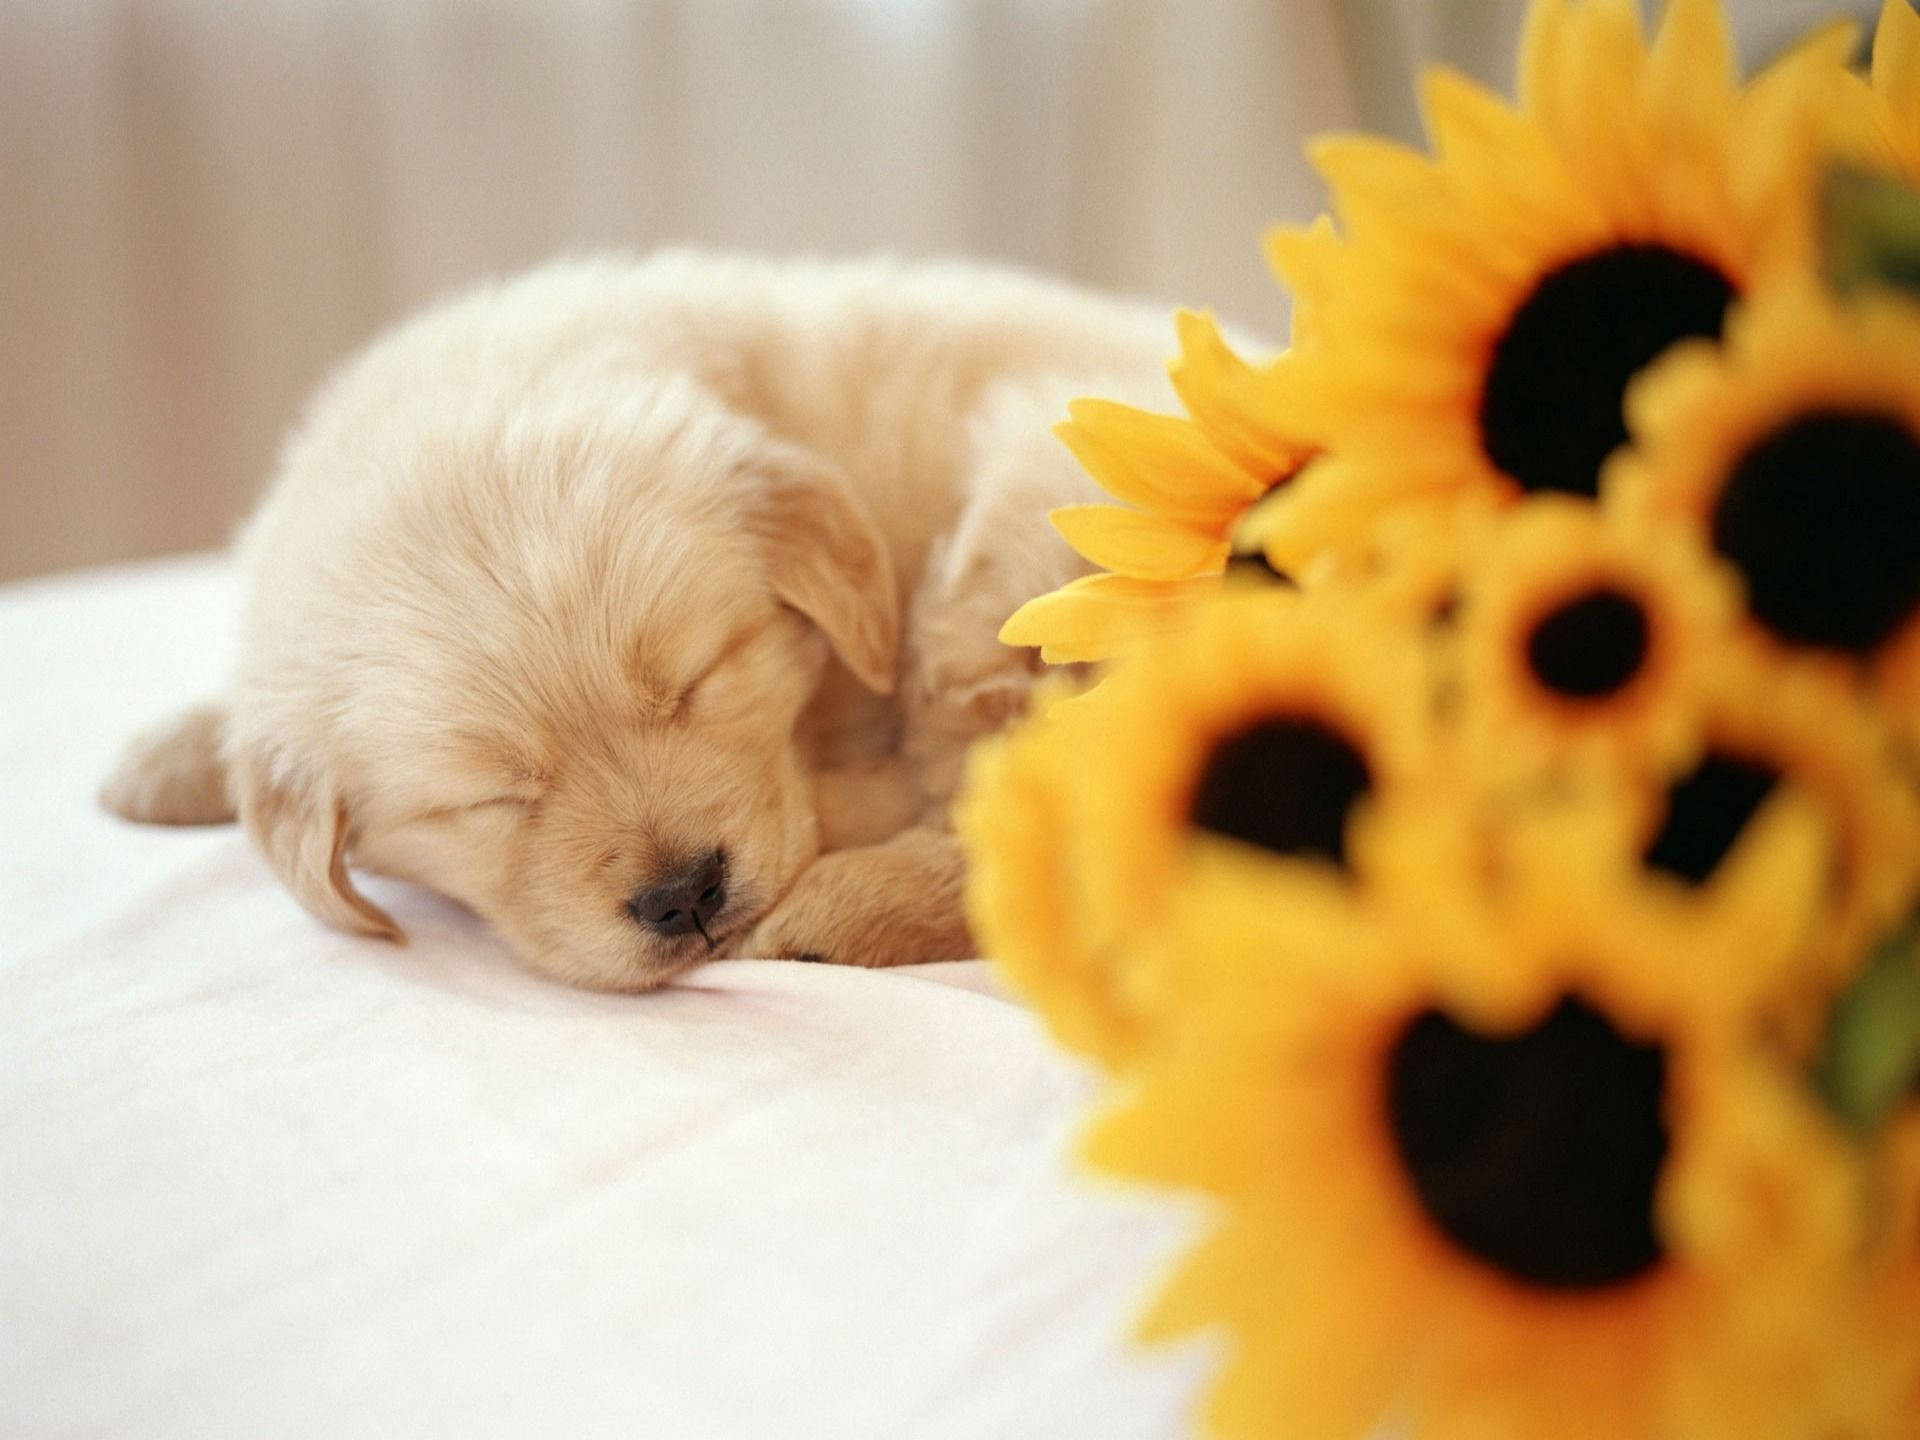 Sleeping Puppy And Sunflowers Background